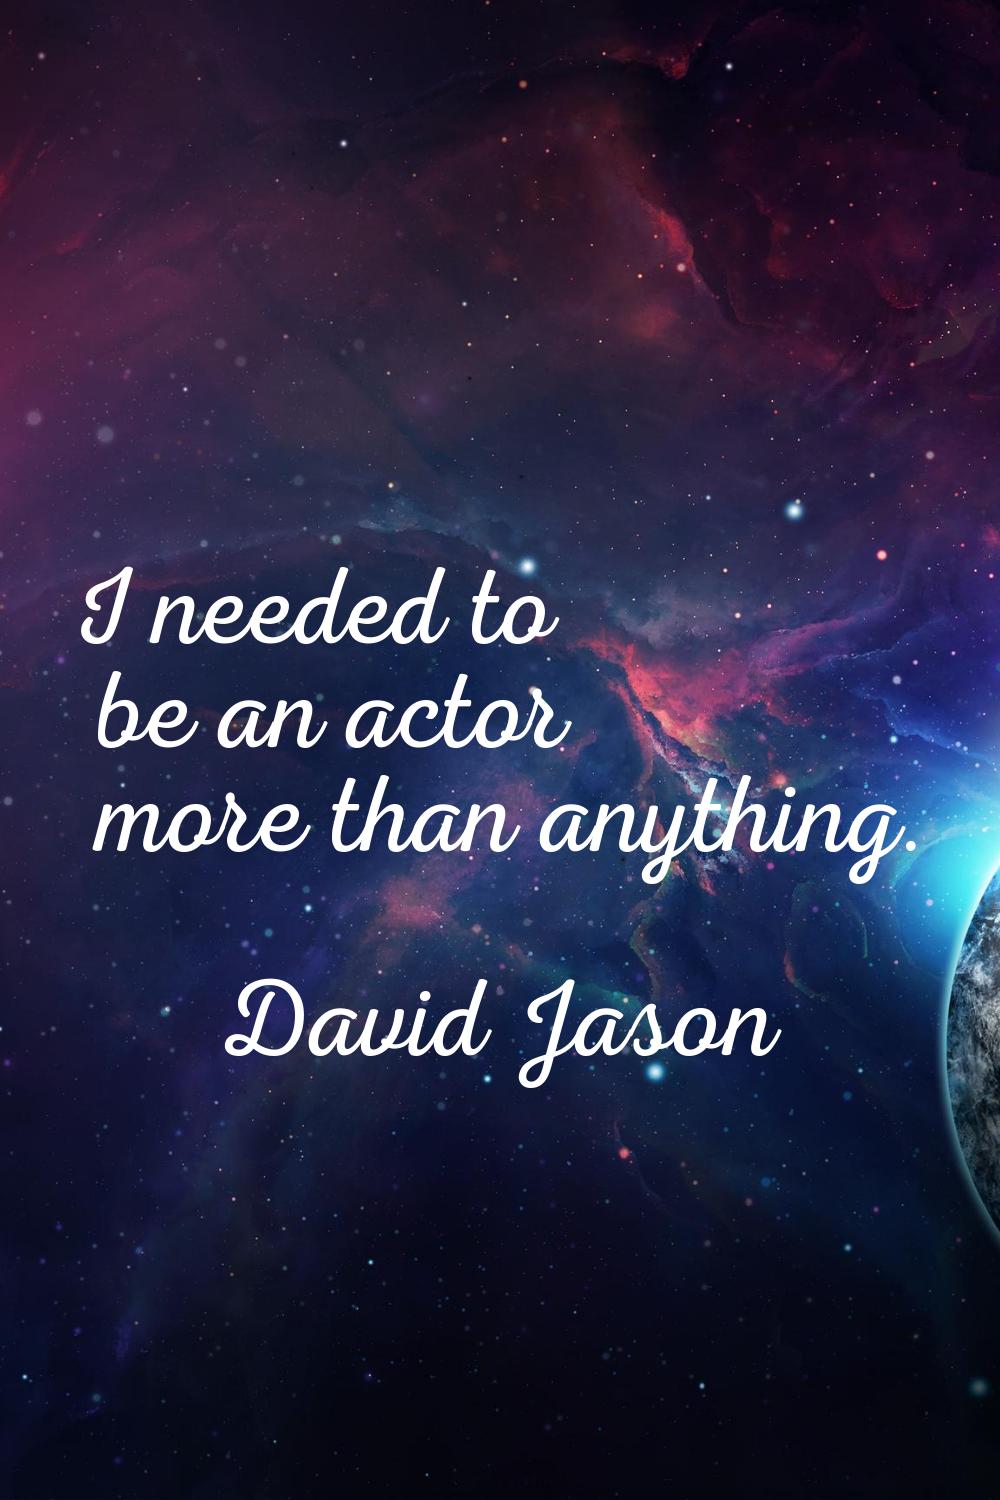 I needed to be an actor more than anything.